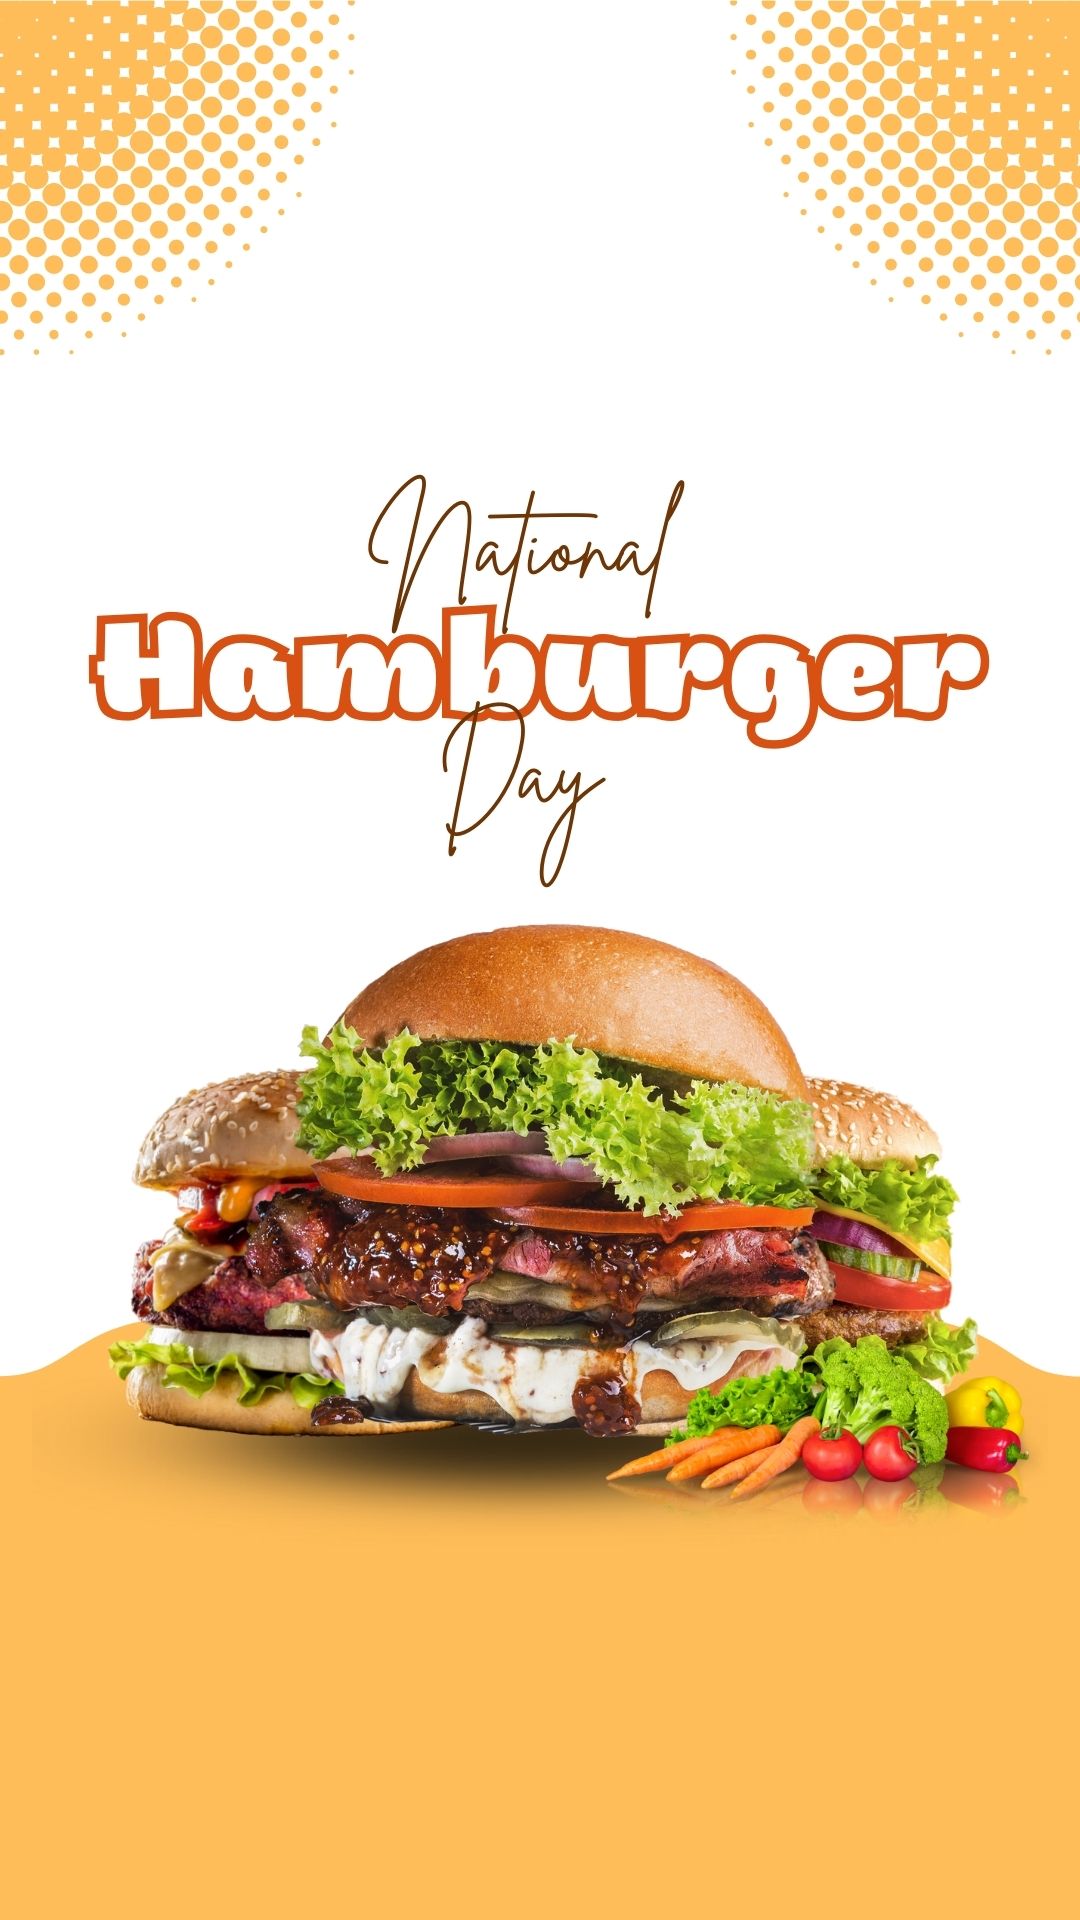 best national hamburger day wishes images for instagram post (39)